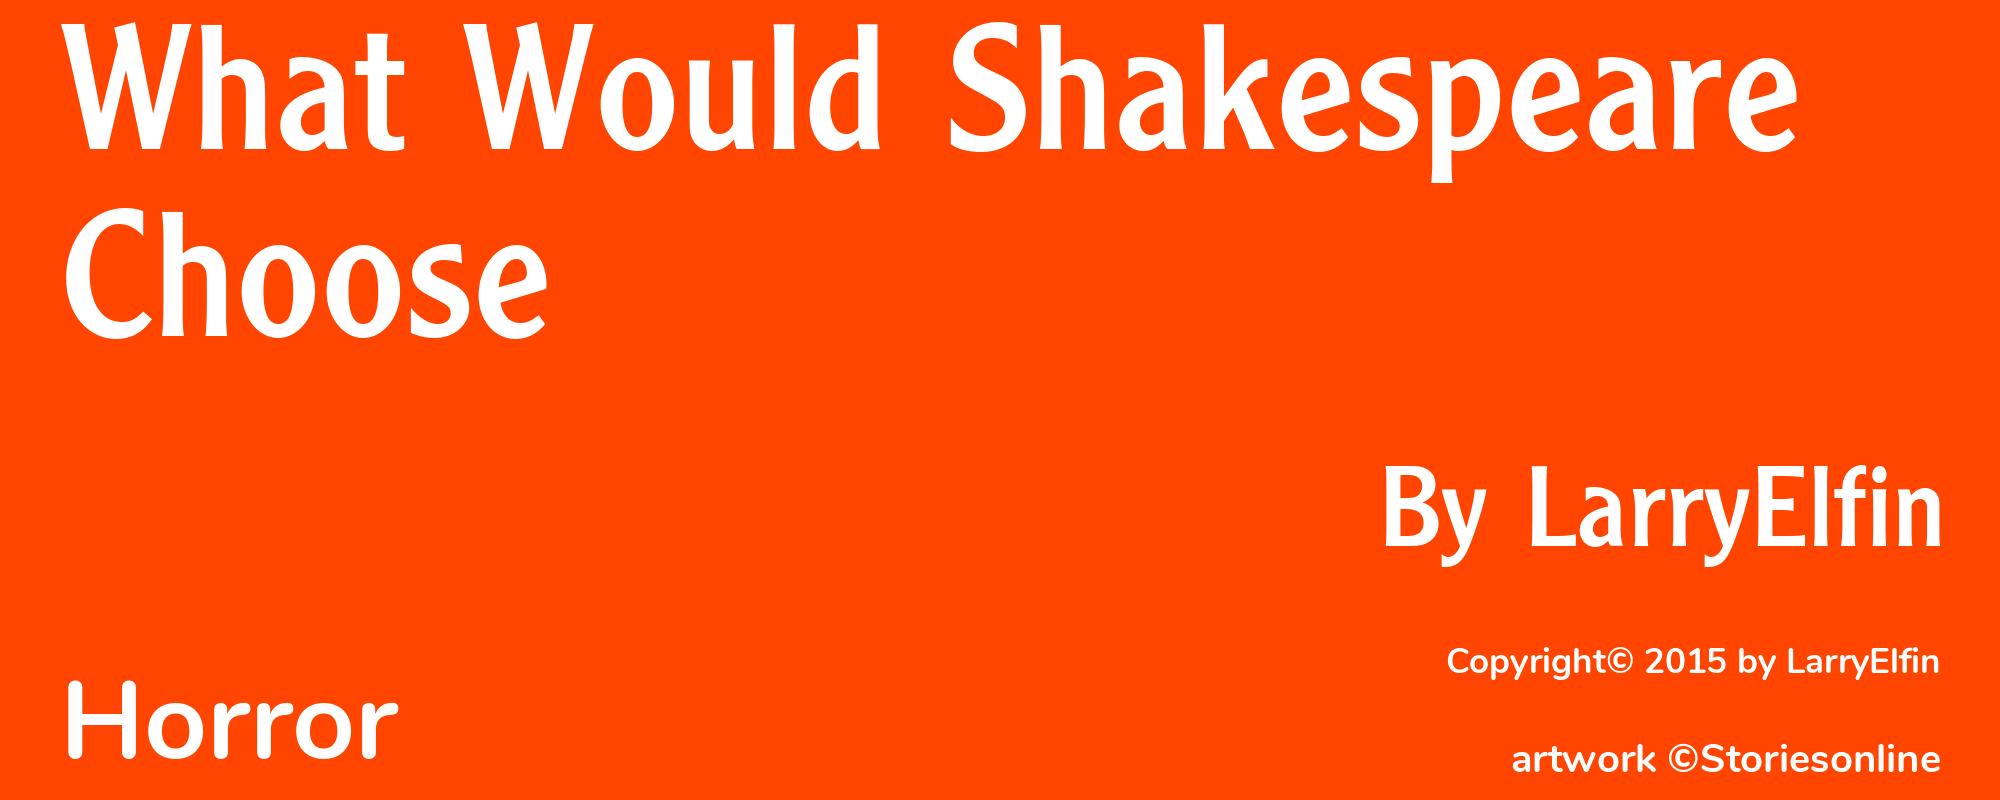 What Would Shakespeare Choose - Cover